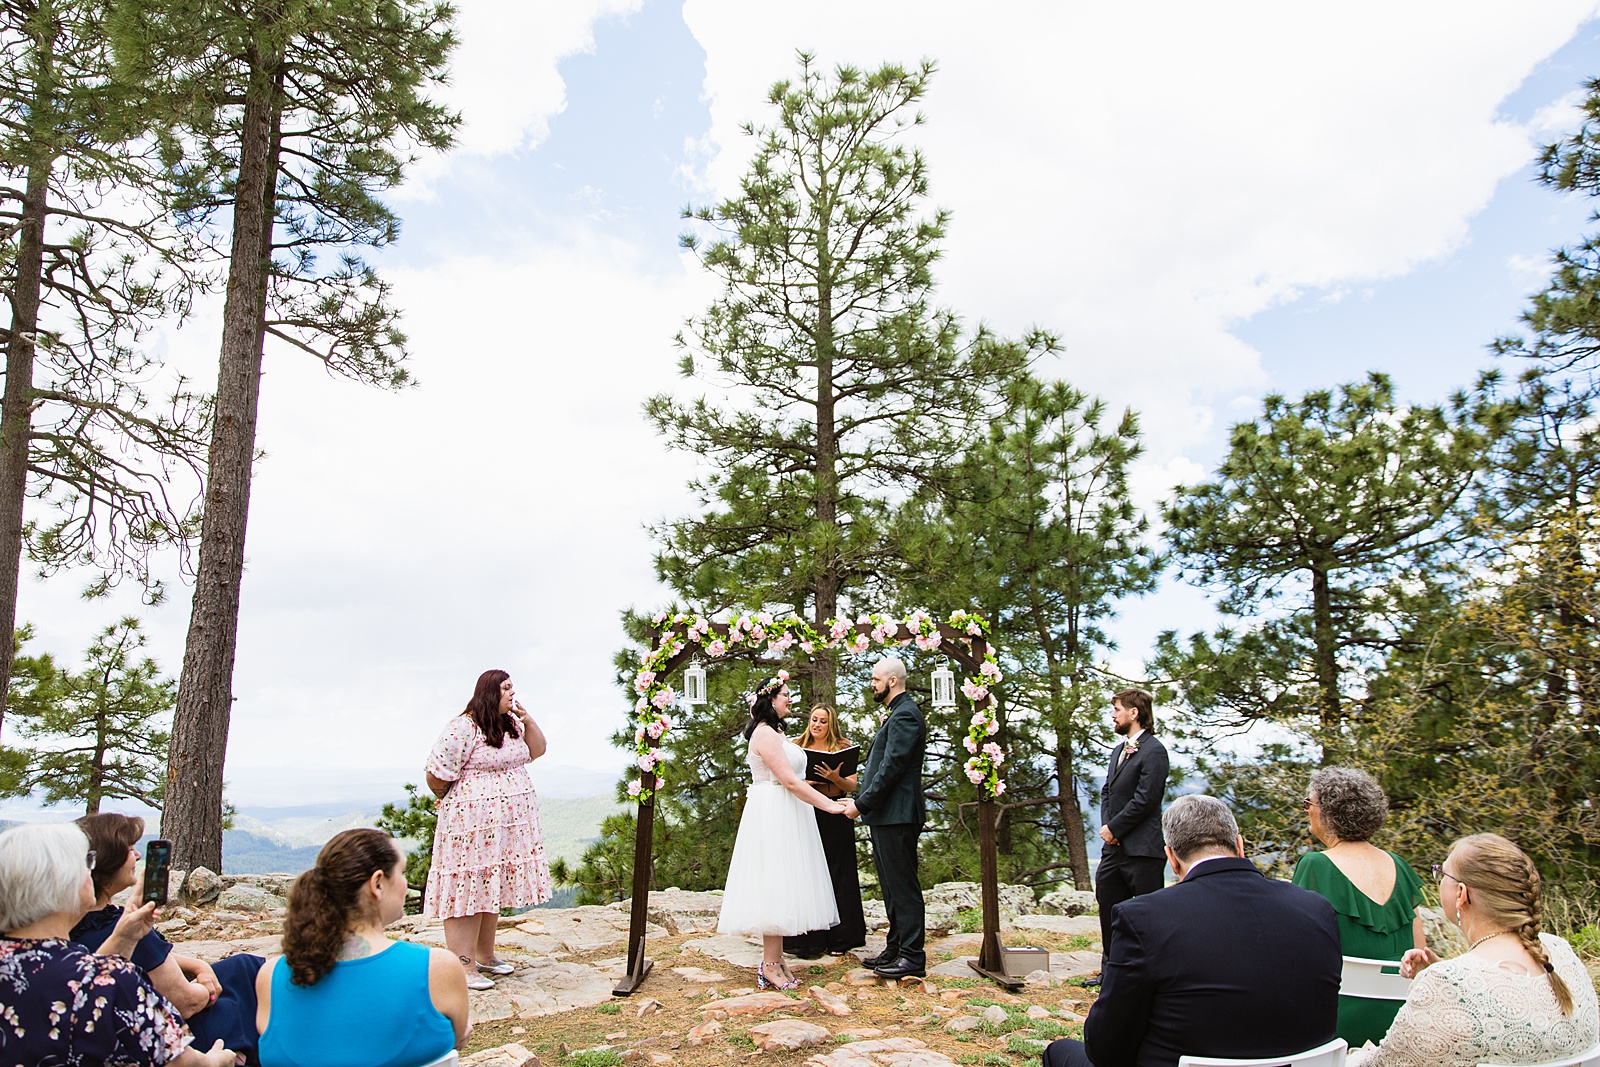 Bride & Groom togethering during Mogollon Rim wedding ceremony by Payson elopement photographer PMA Photography.